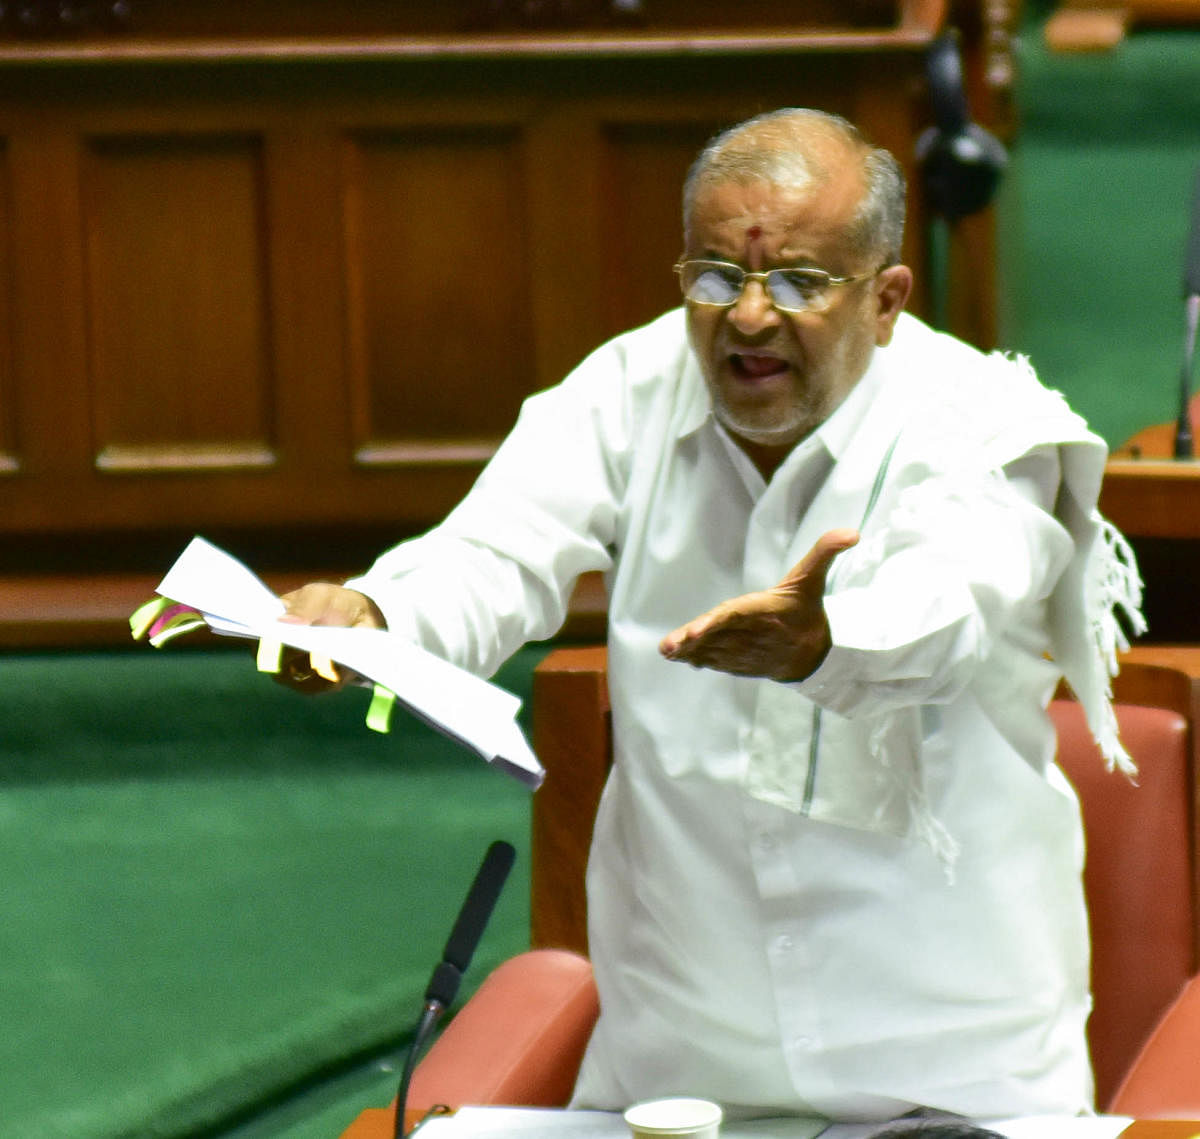 Higher education minister G T Devegowda. (DH File Photo)